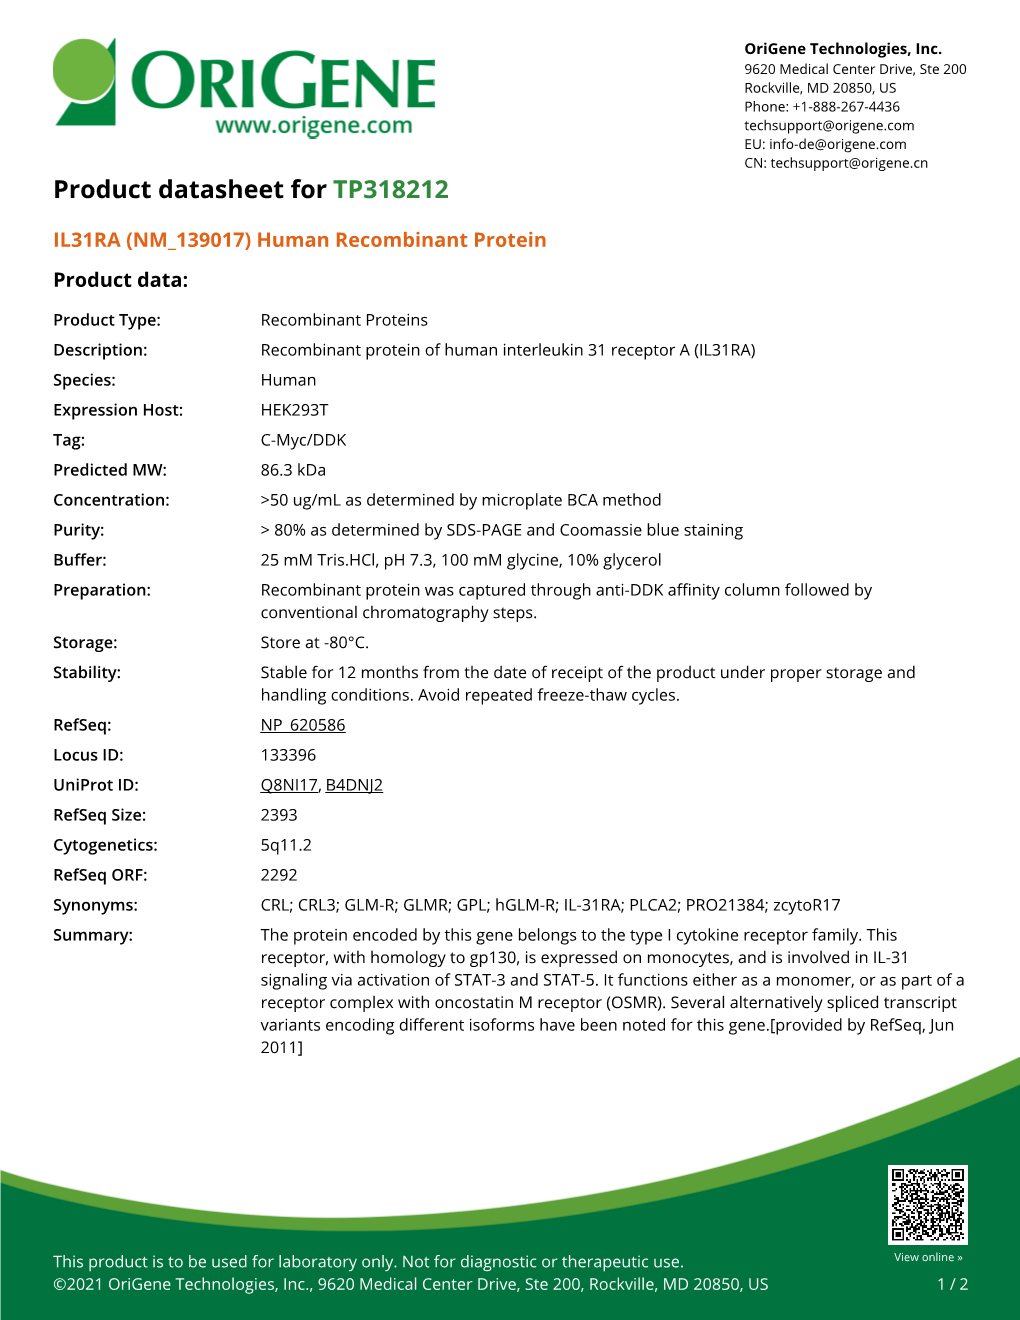 IL31RA (NM 139017) Human Recombinant Protein Product Data